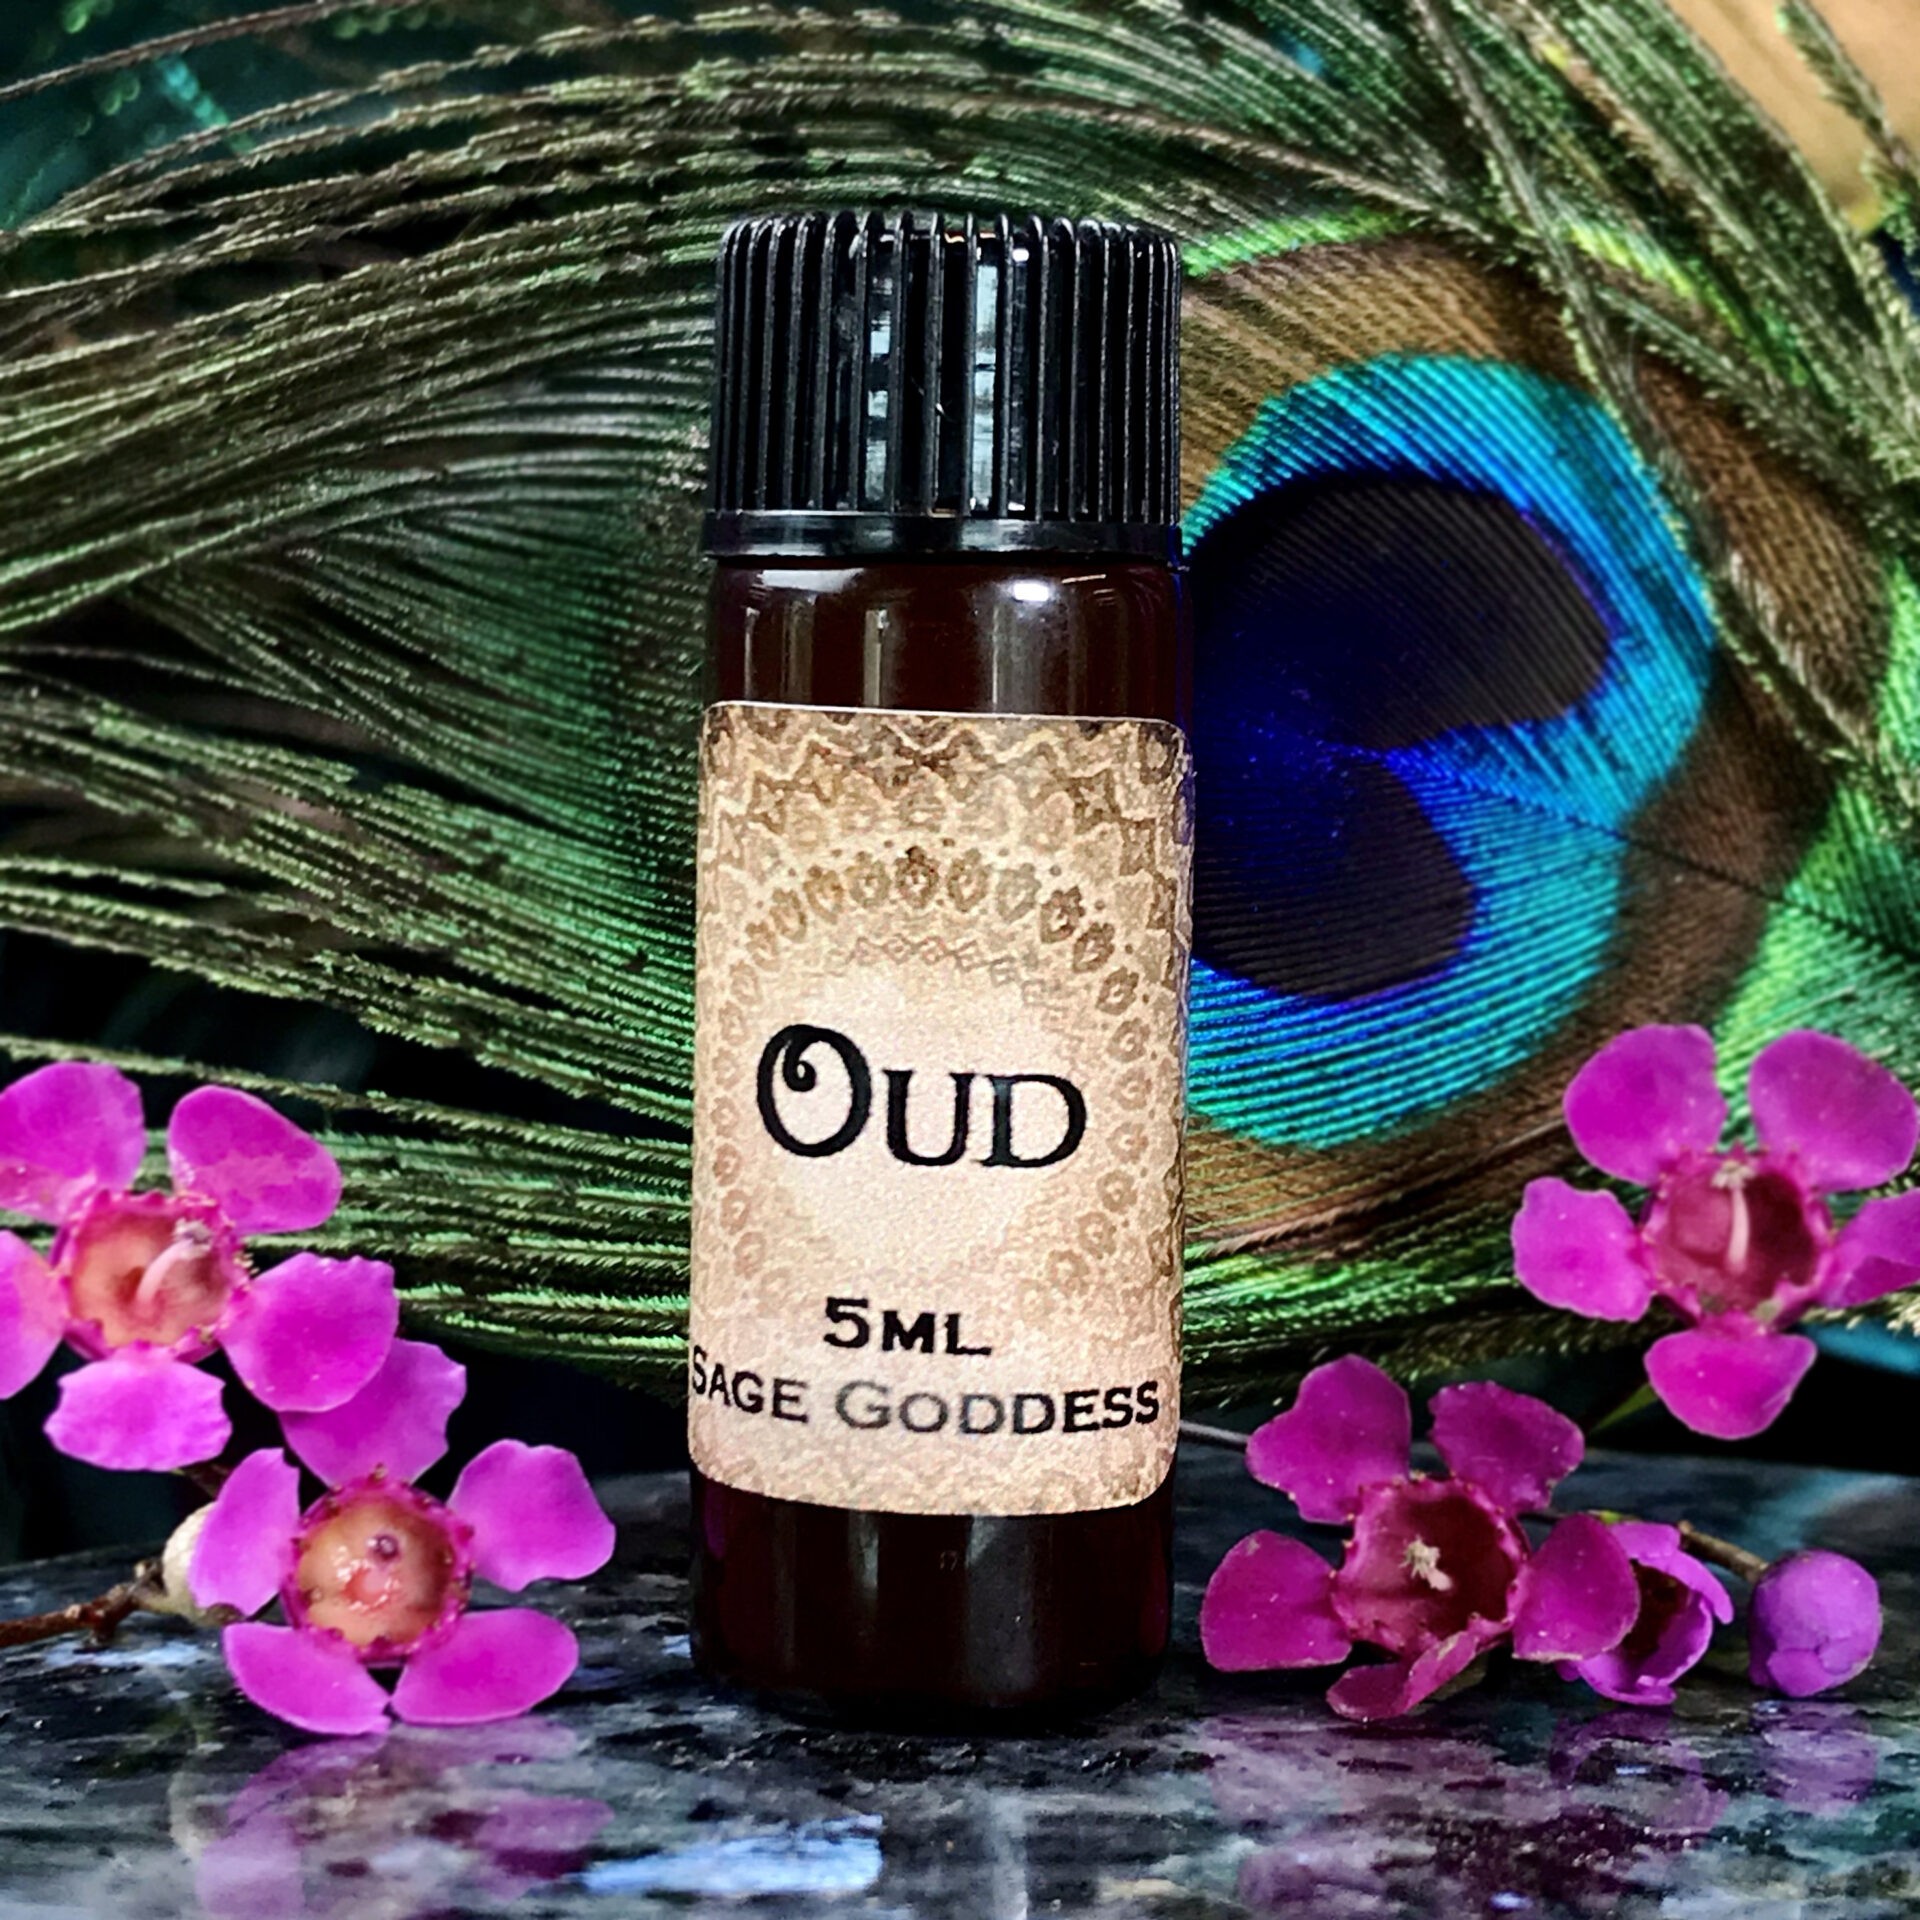 What Is Oud (Oudh) Fragrance And Why Is It So Expensive?